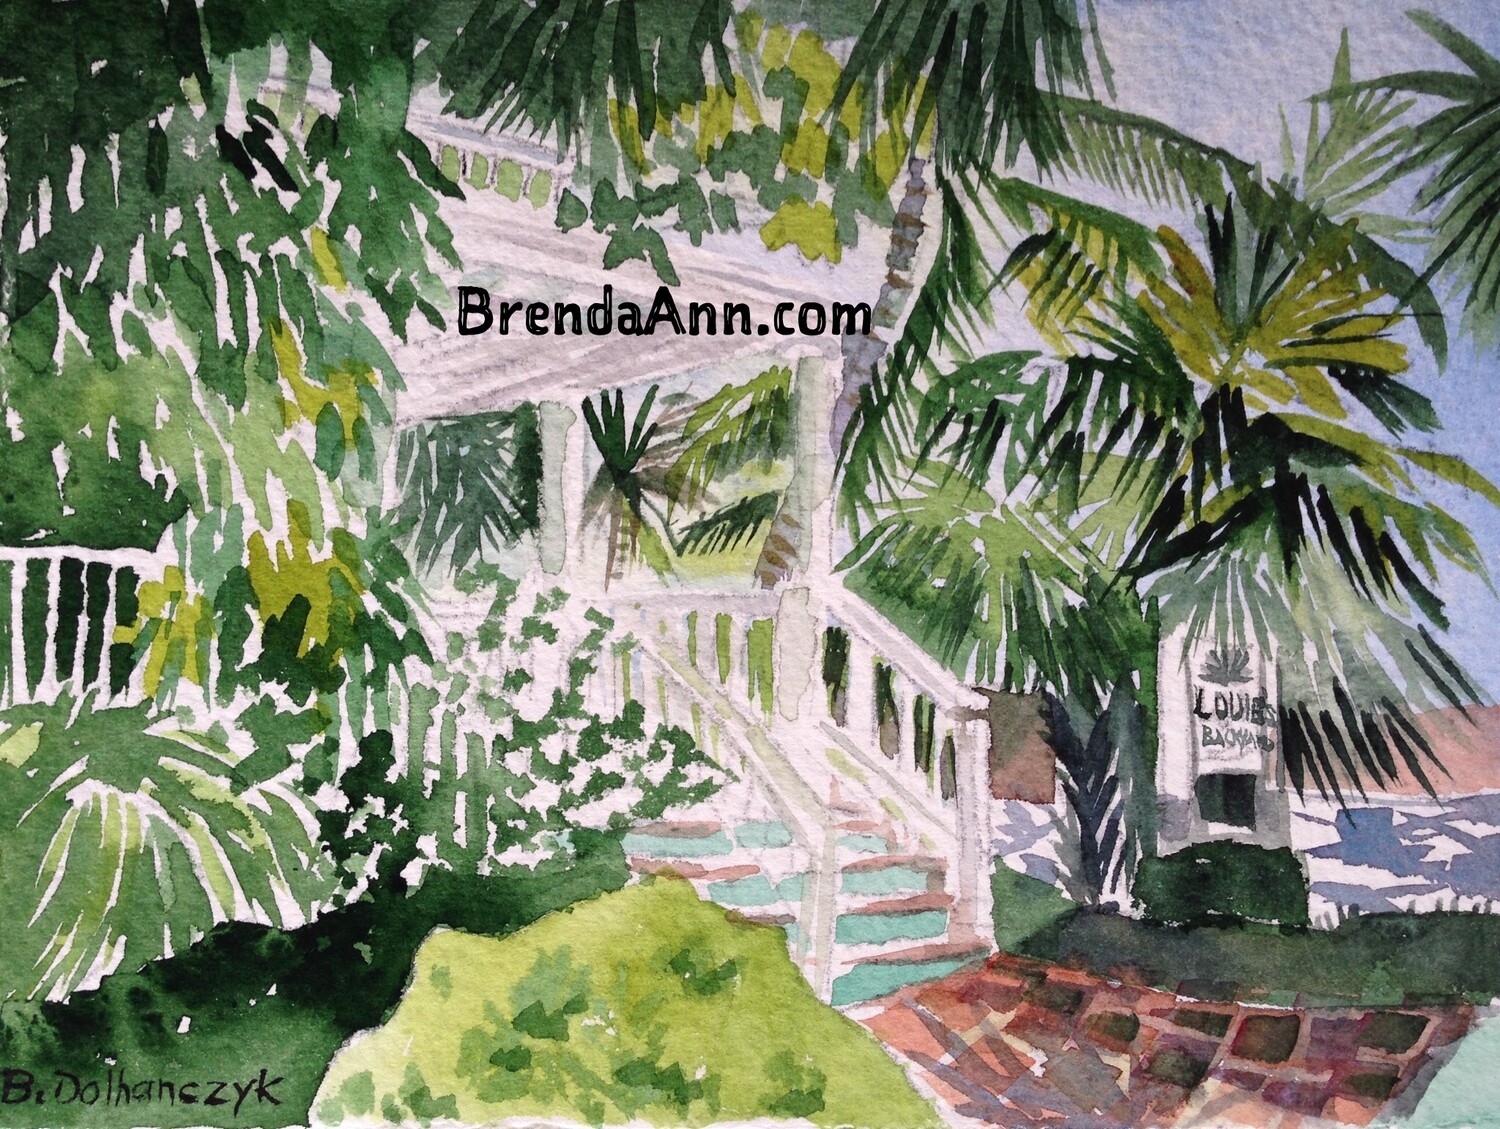 Louie's Backyard (White) in Key West, FL - Hand Signed Archival Watercolor Print